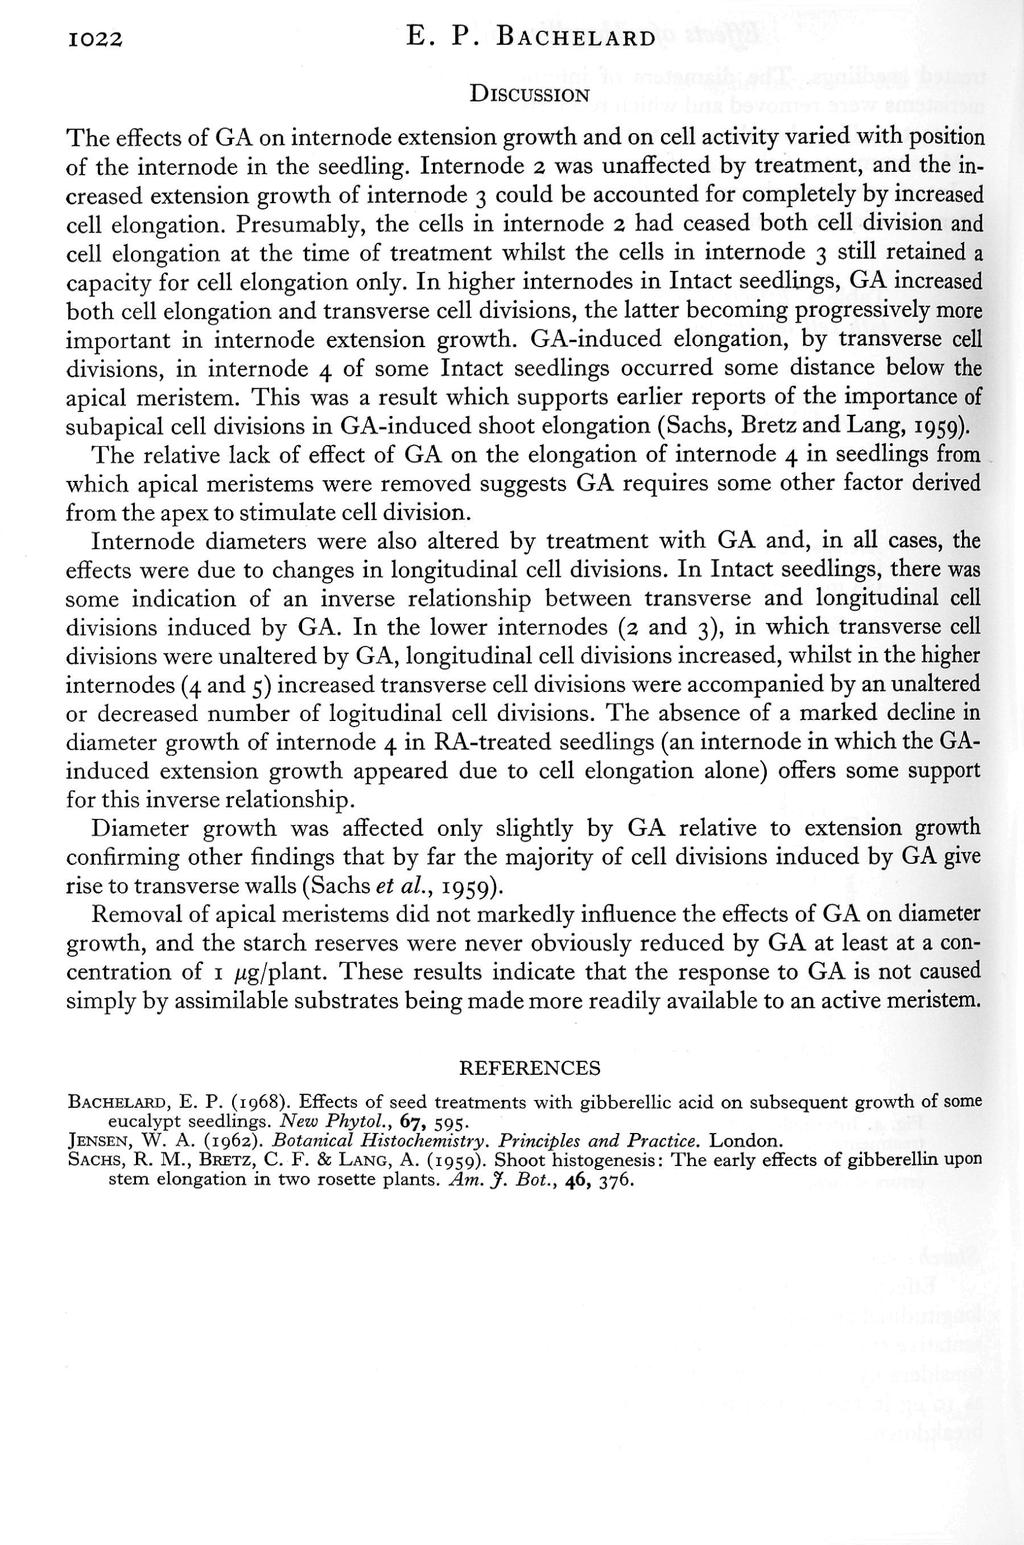 22 E. P. BACHELARD DISCUSSION The effects of GA on internode extension growth and on cell activity varied with position of the internode in the seedling.